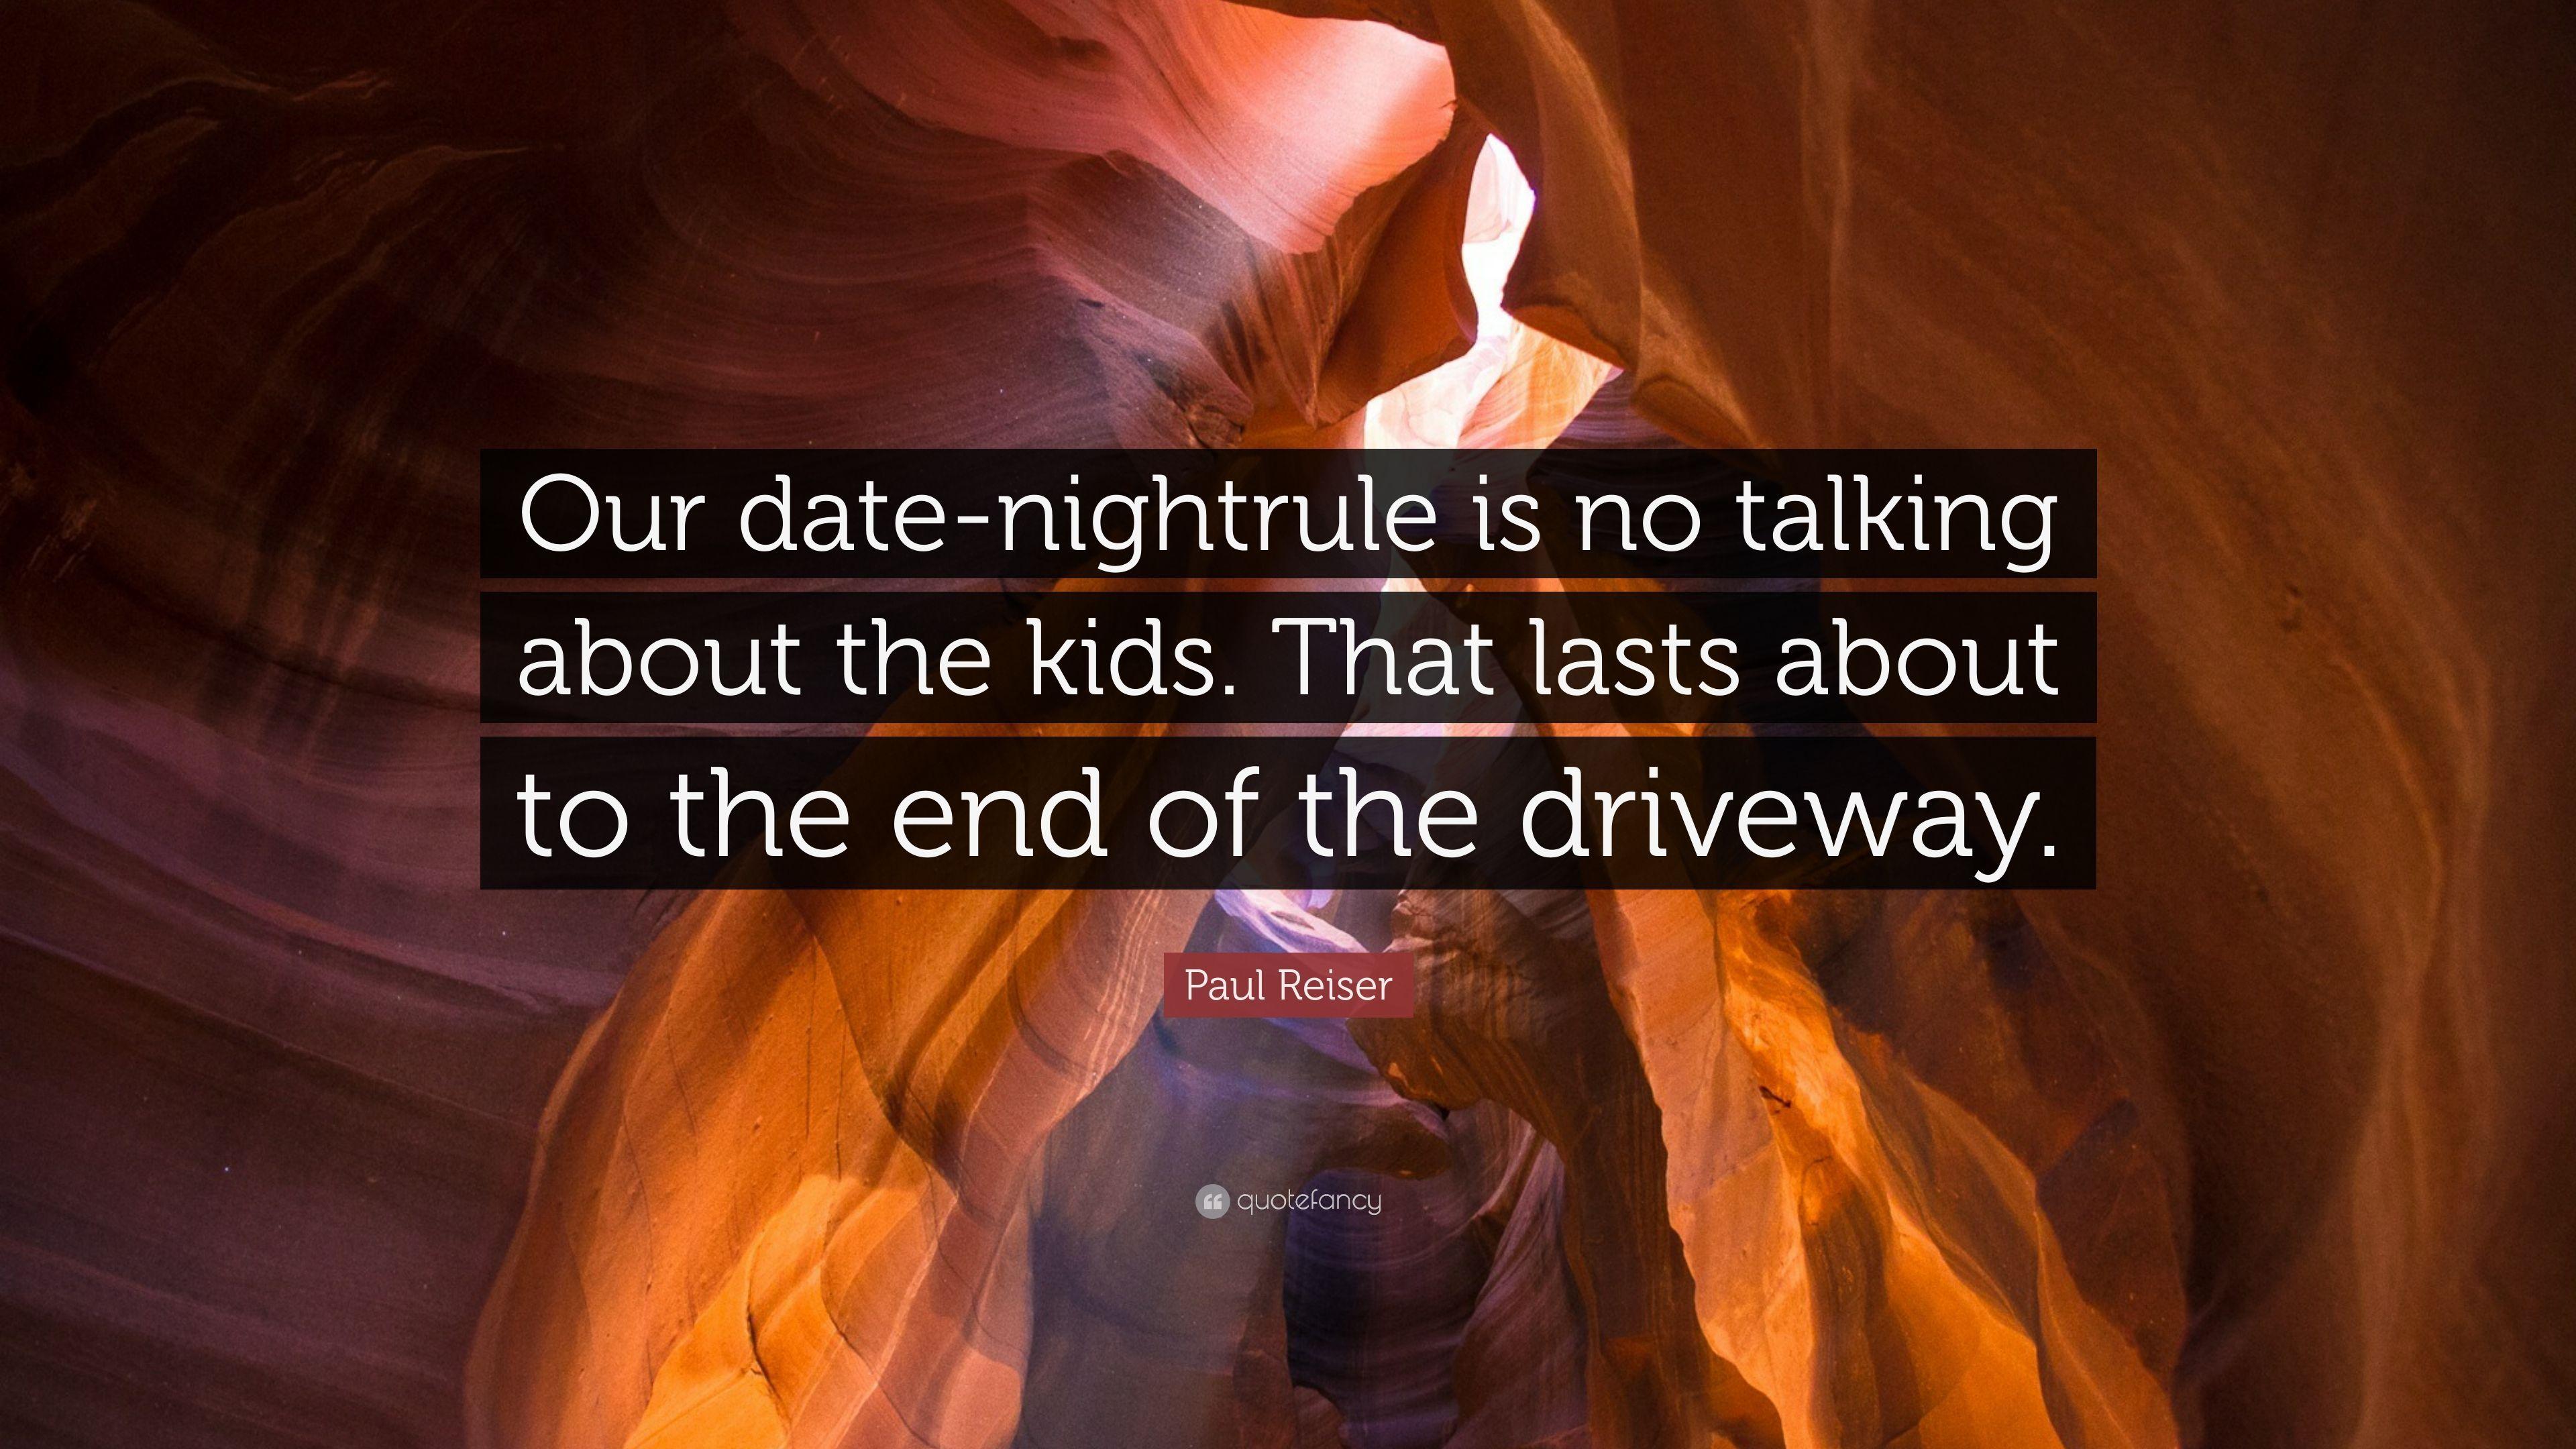 Paul Reiser Quote: “Our Date Nightrule Is No Talking About